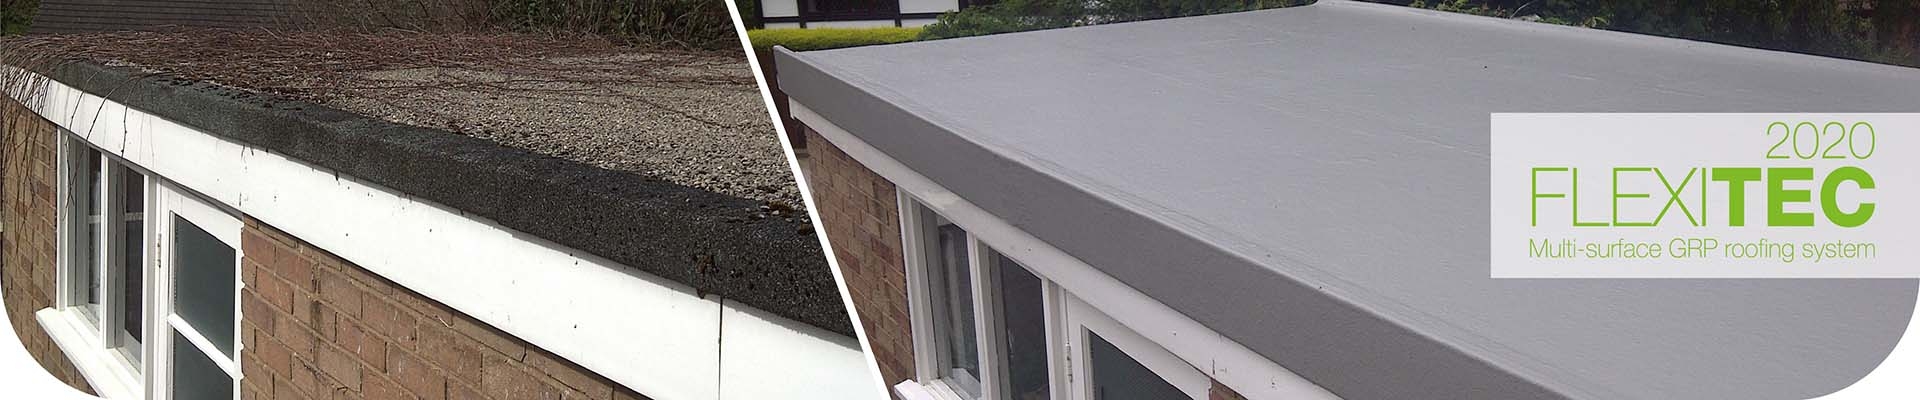 The First Flexible GRP Roofing System with Full Overlay Capabilities